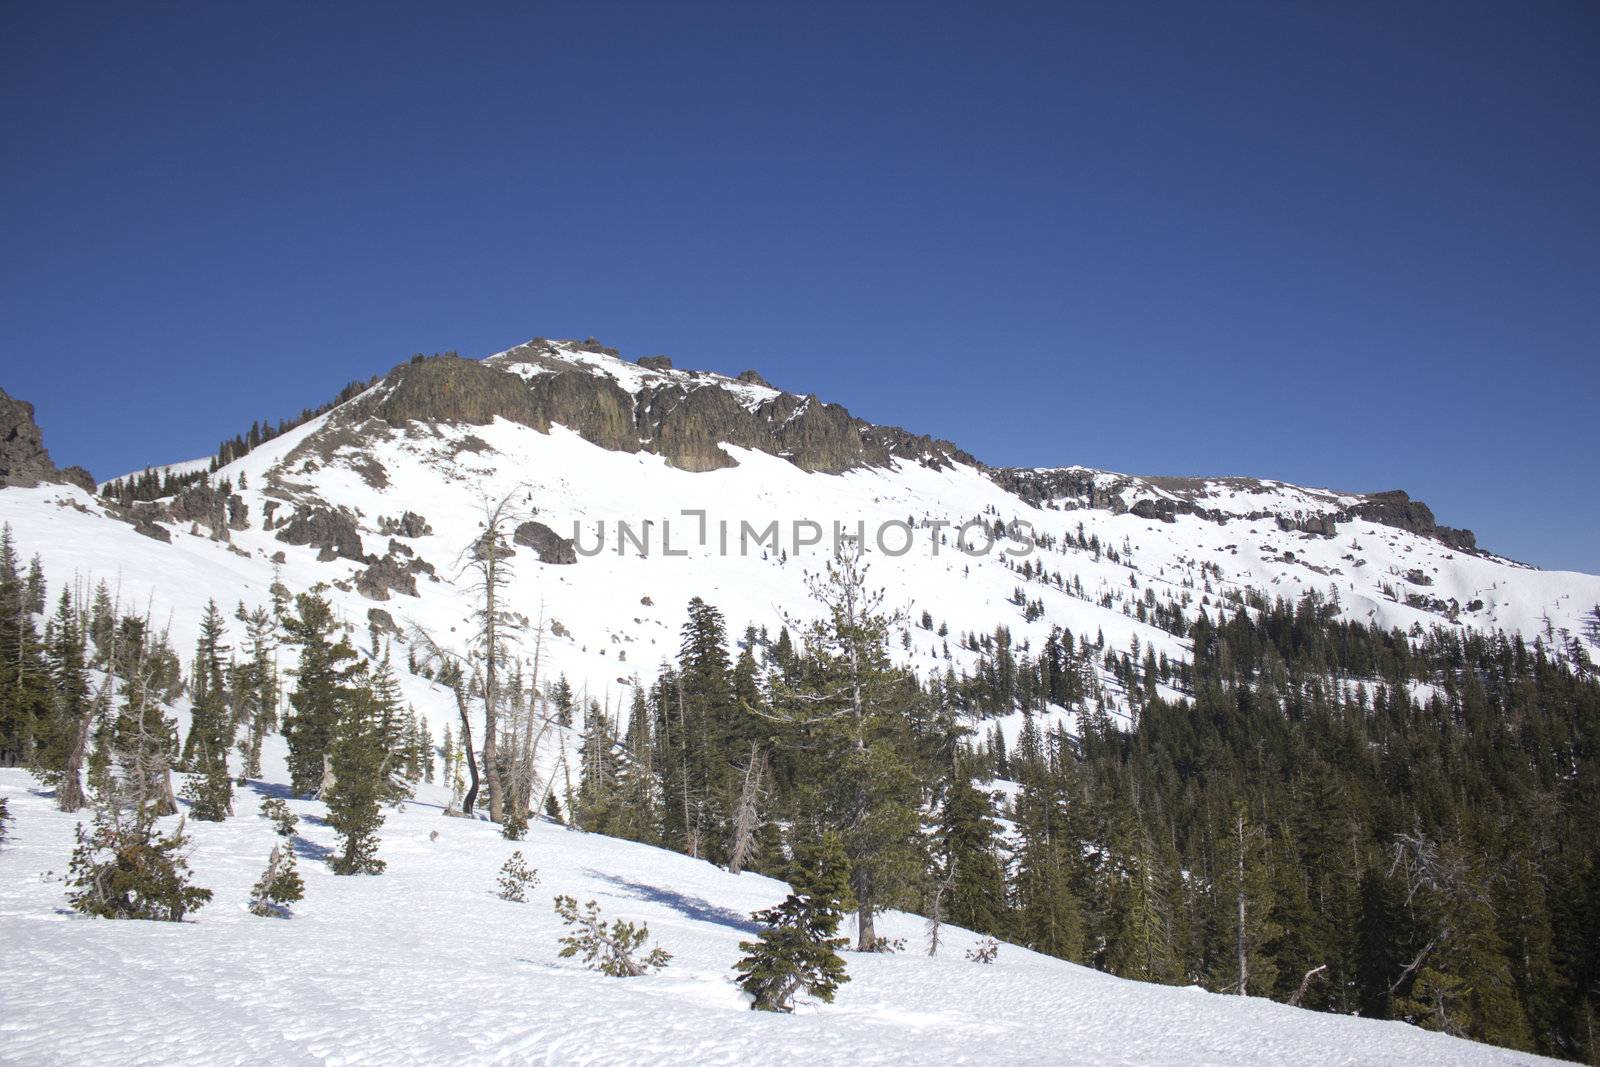 Sierra Nevada snow ranges by jeremywhat